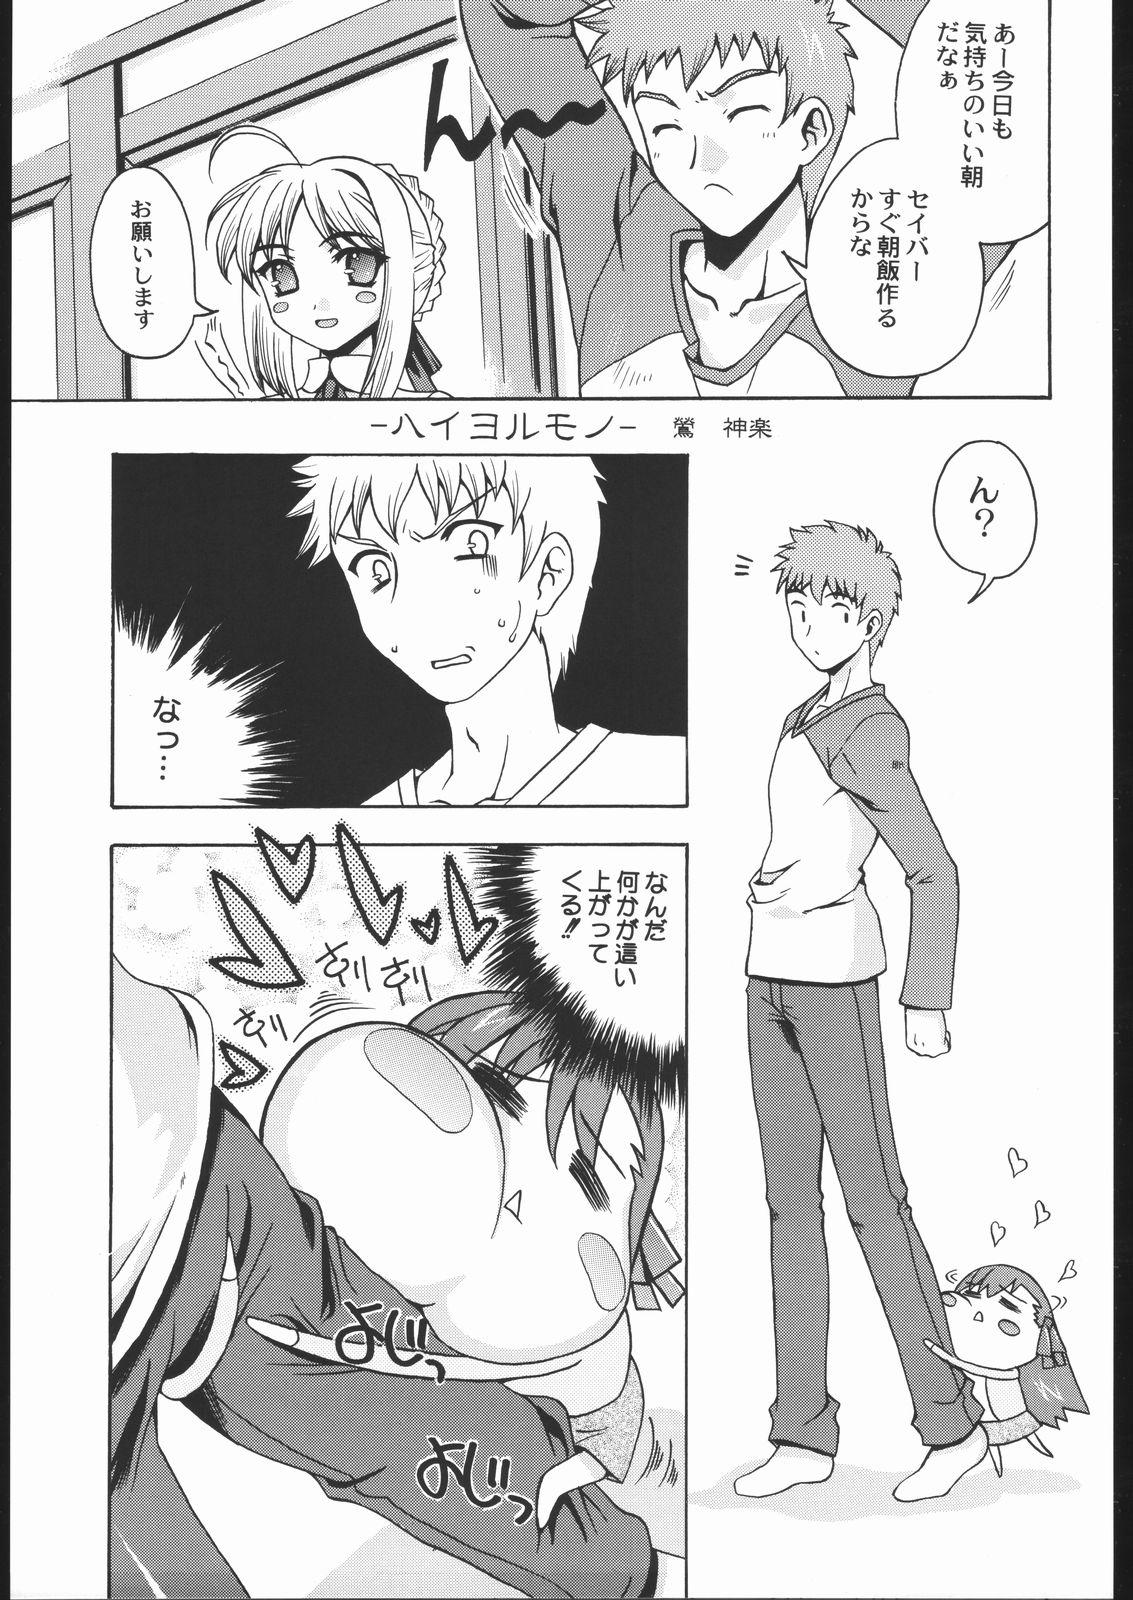 Roludo Going My Way - Fate stay night Culona - Page 4